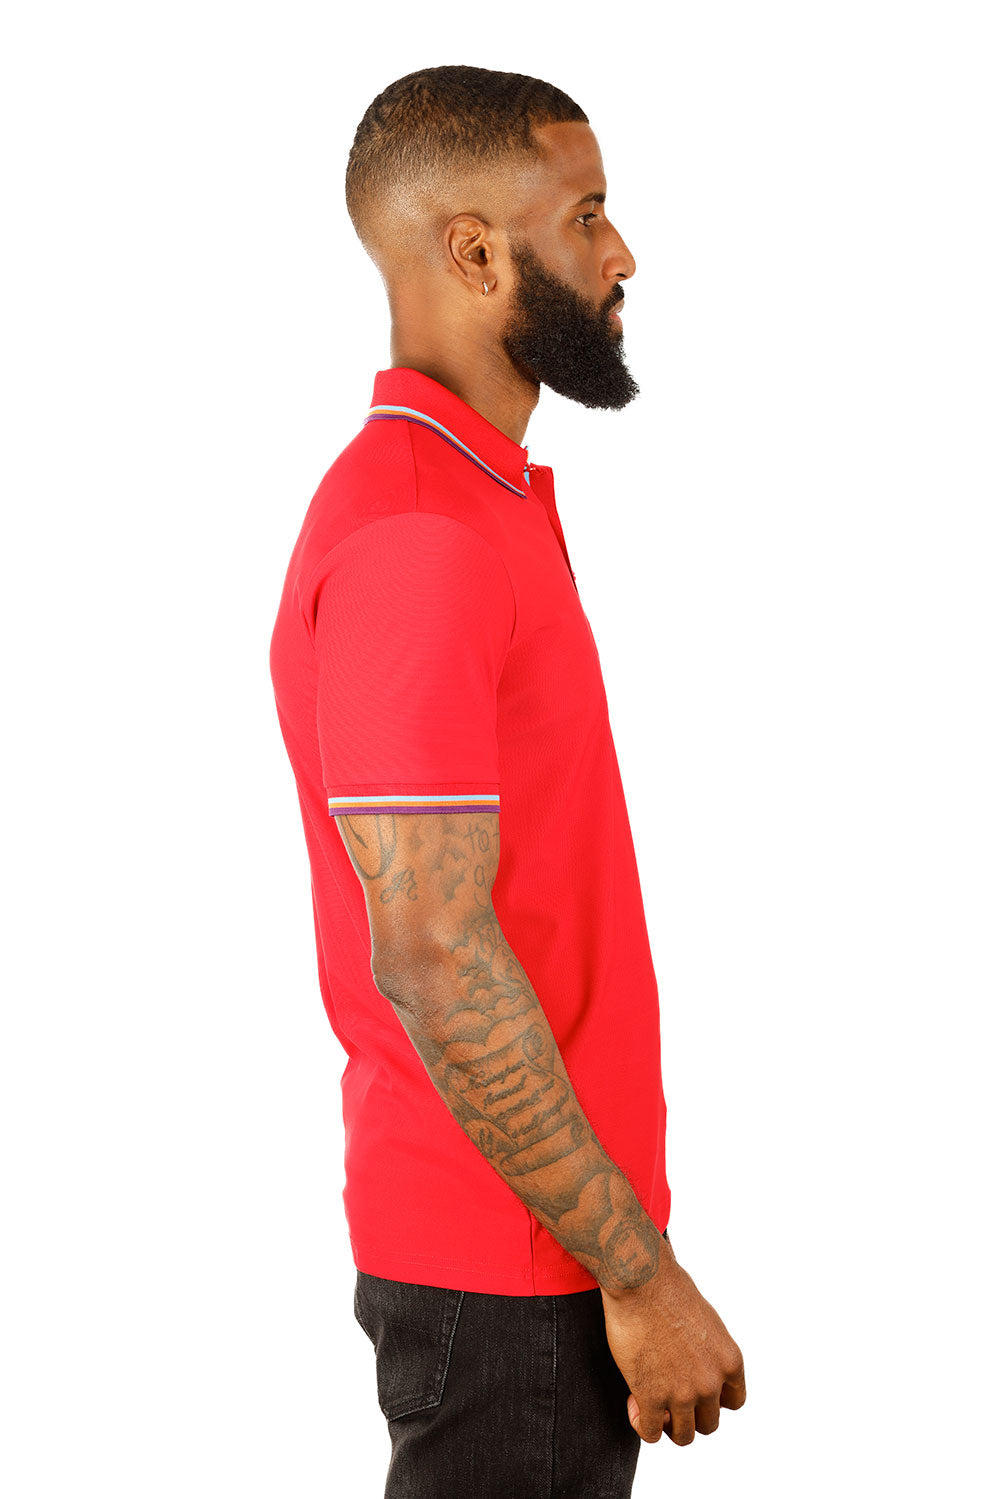 Barabas Men's Solid Color Linear Collar and Cuff Polo Shirts 3PS127 Red